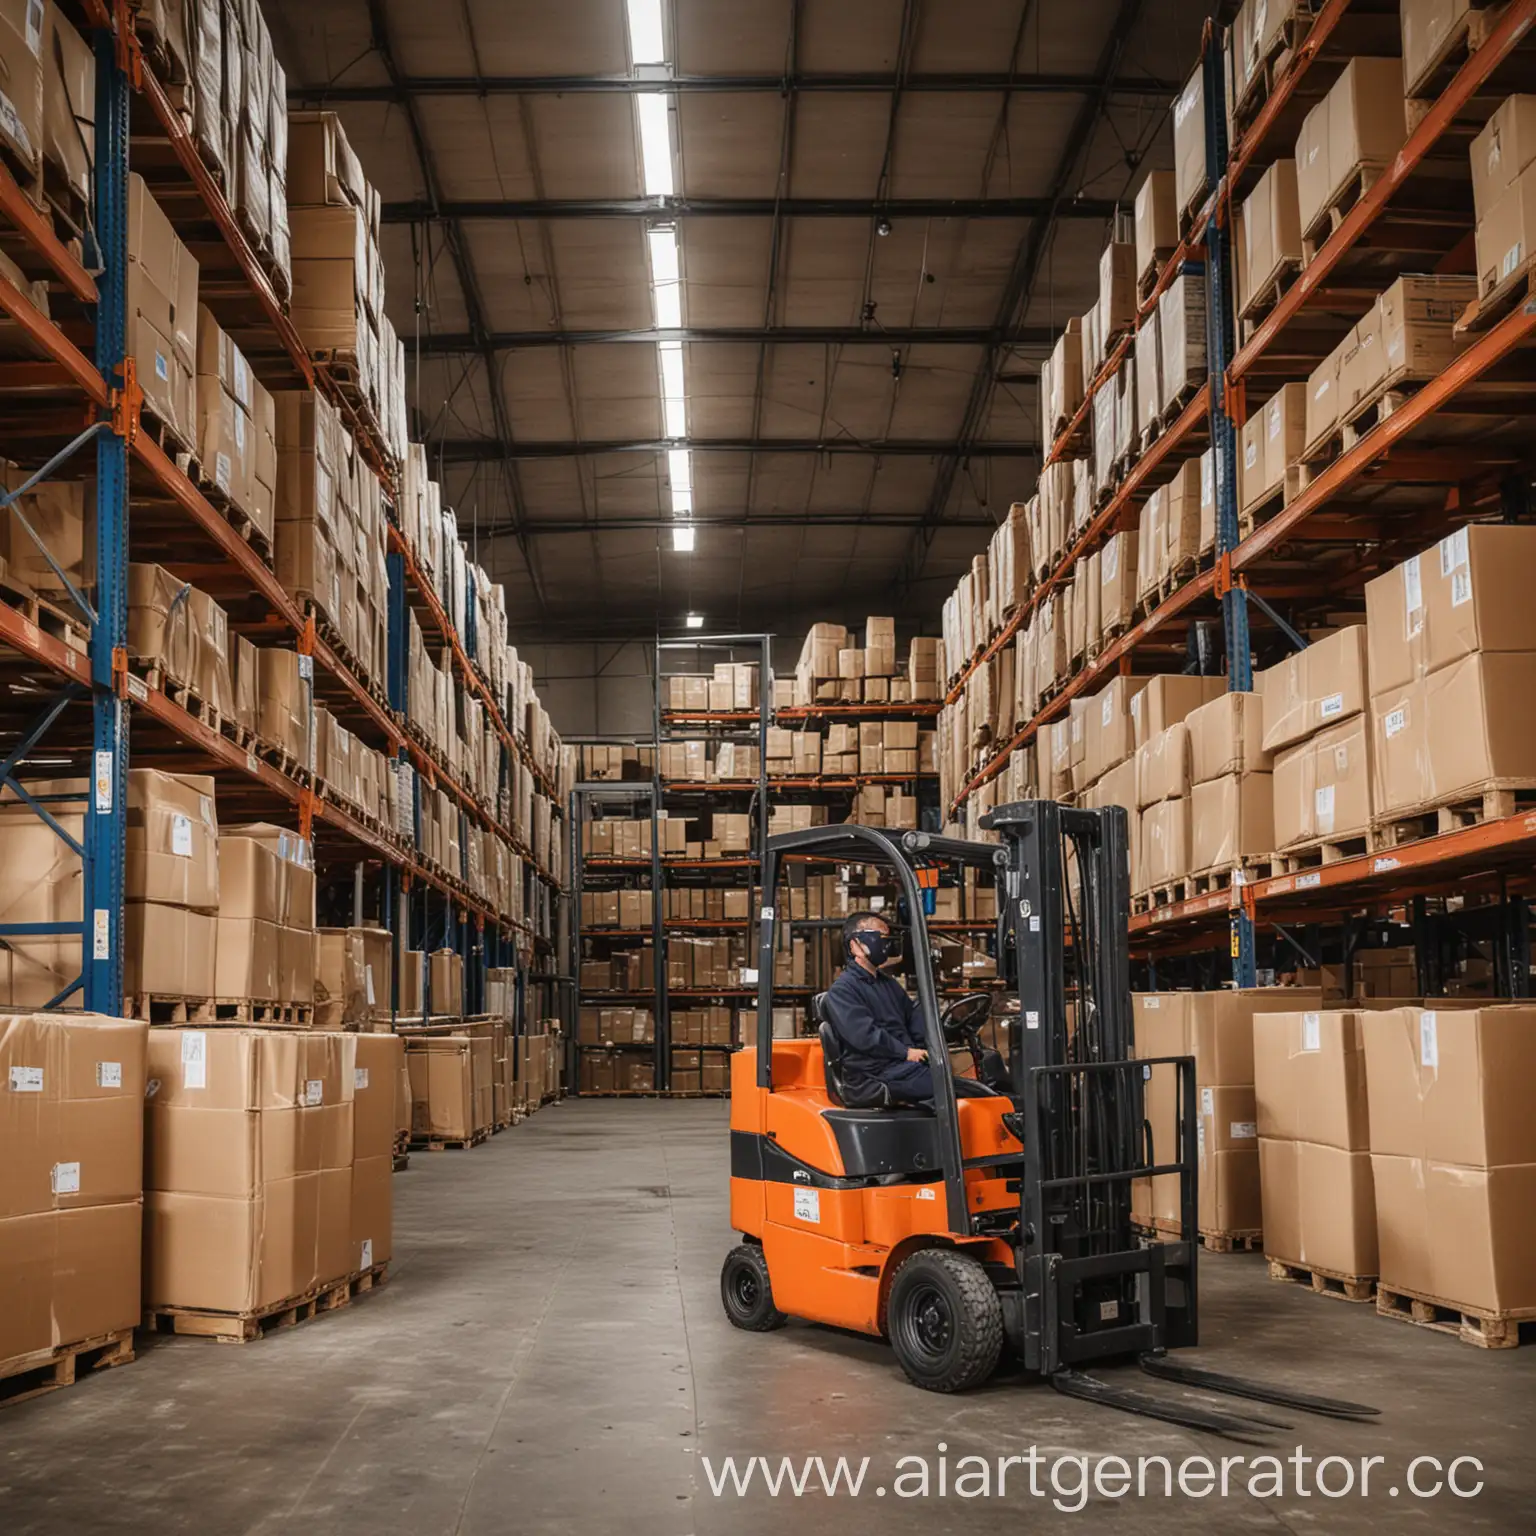 Industrial-Warehouse-Scene-with-Ozone-and-Forklift